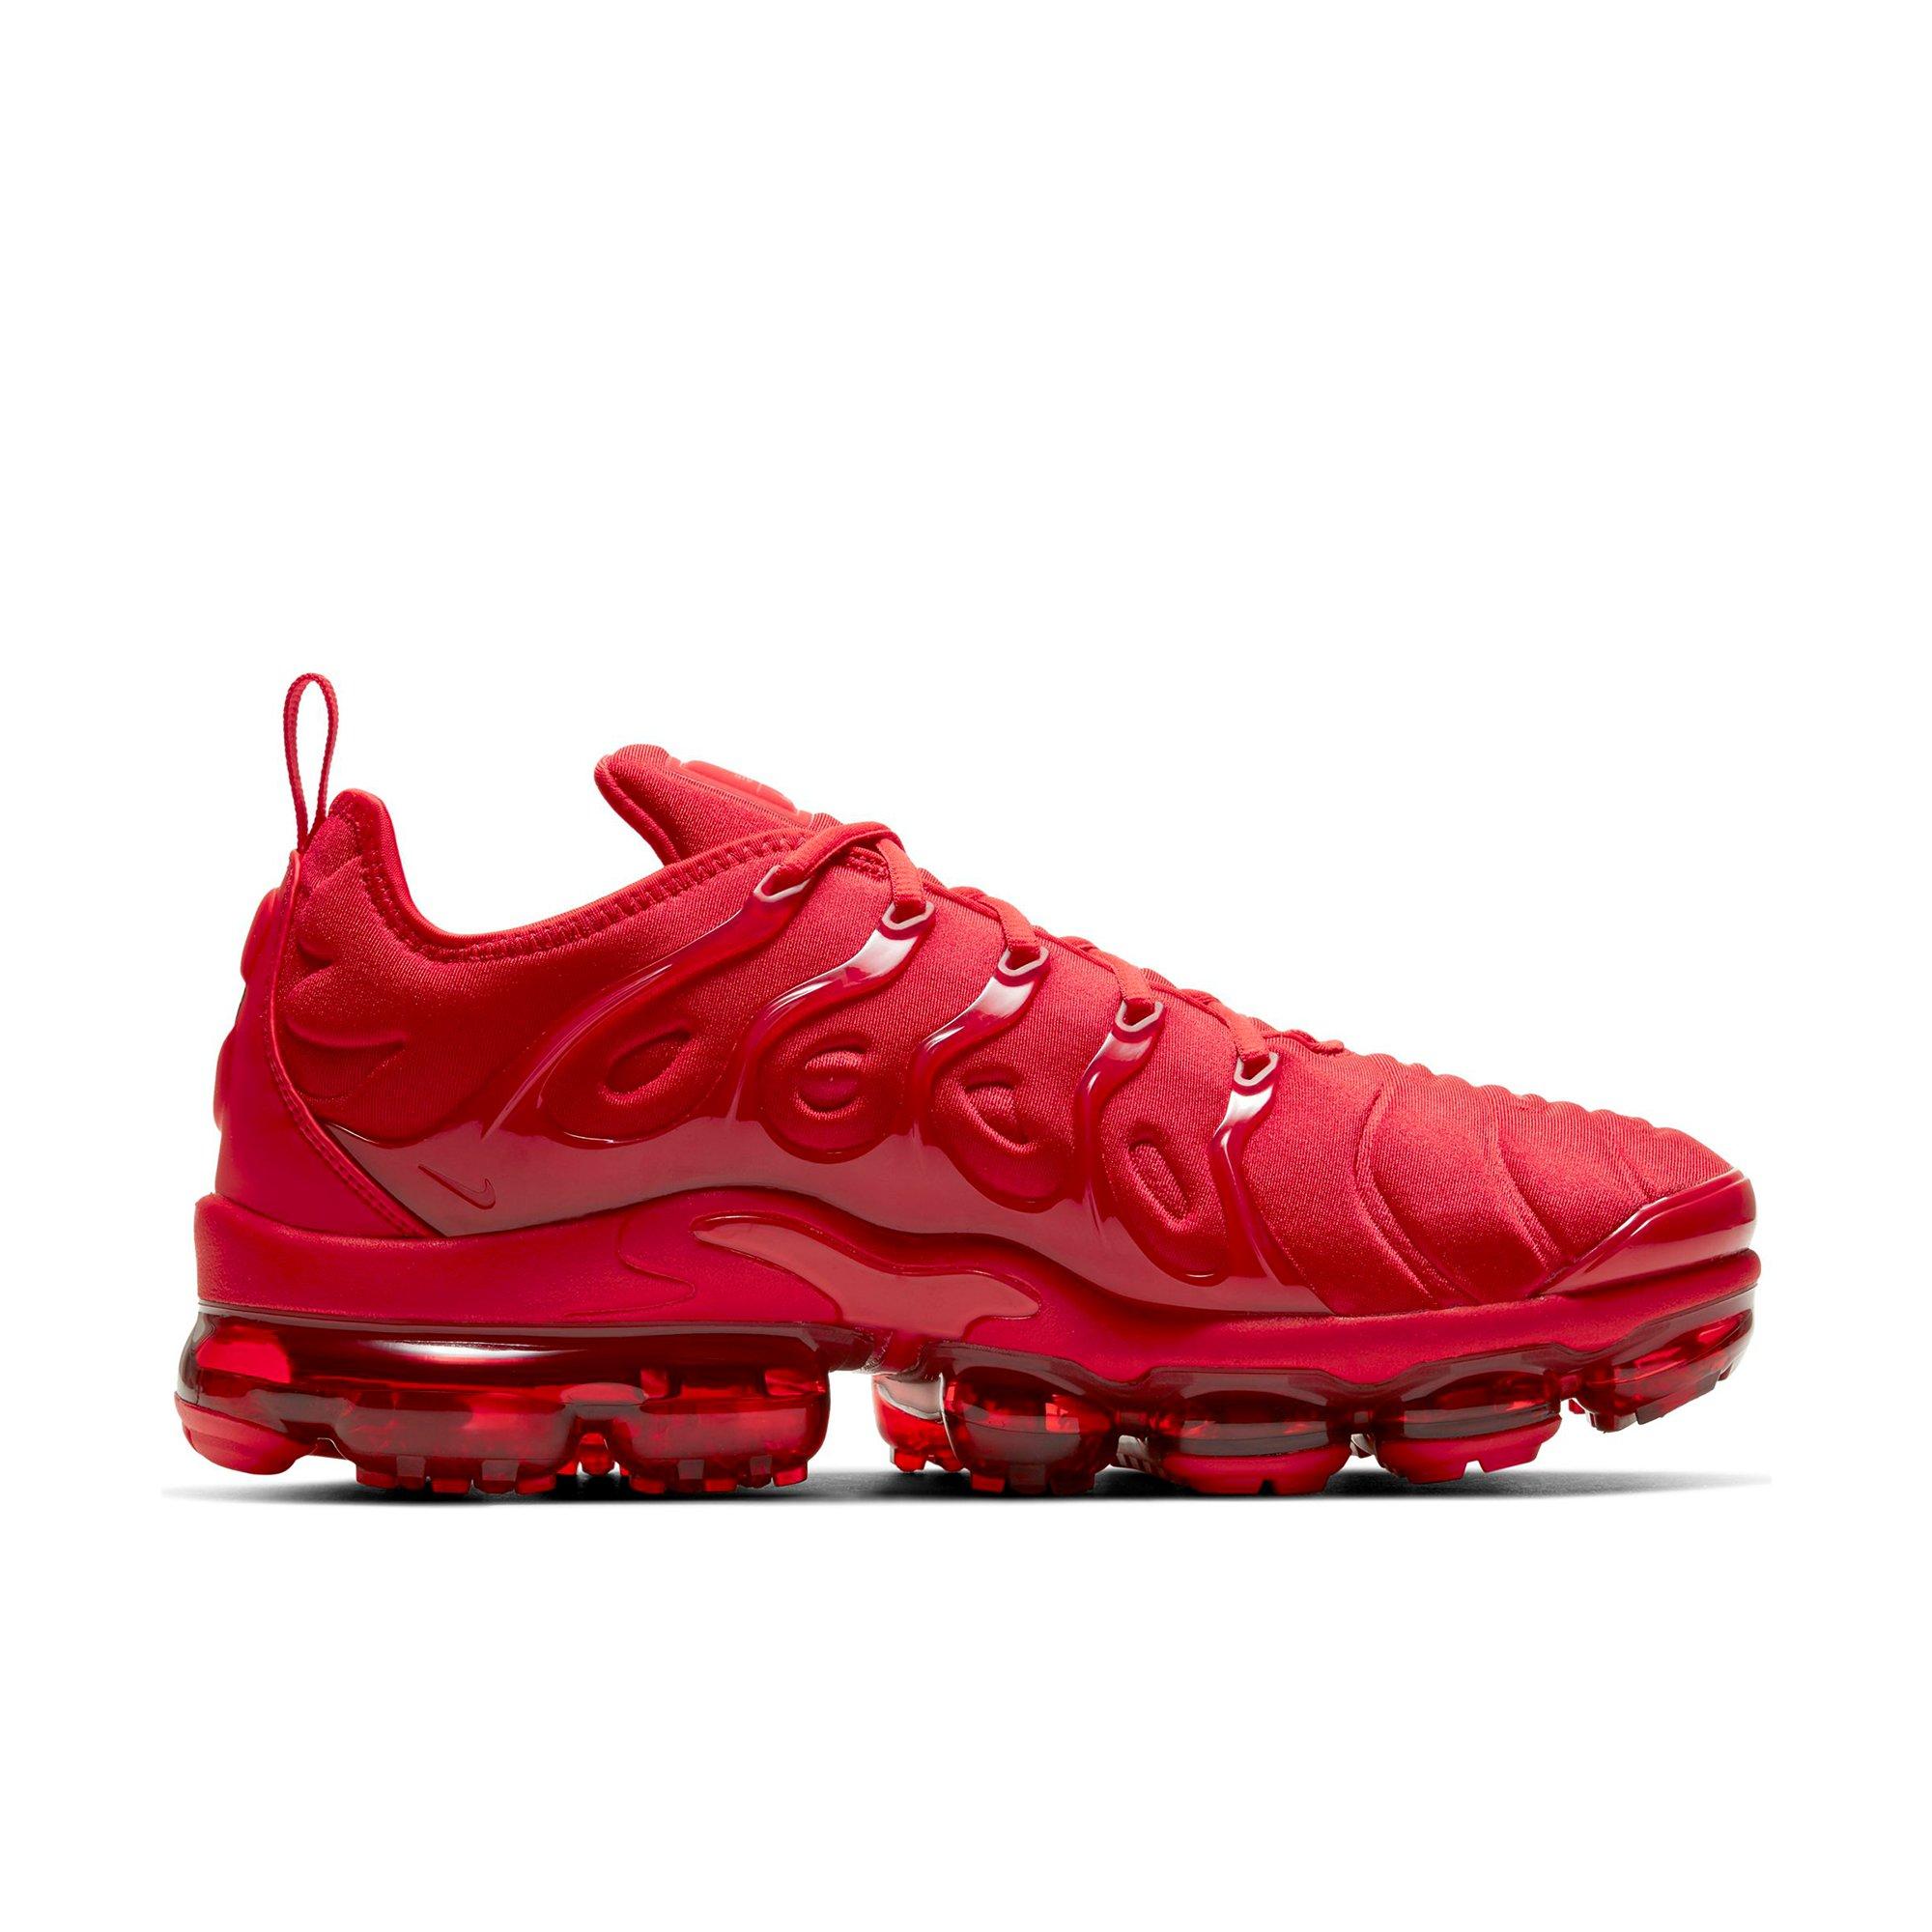 nike vapormax plus women's black and red